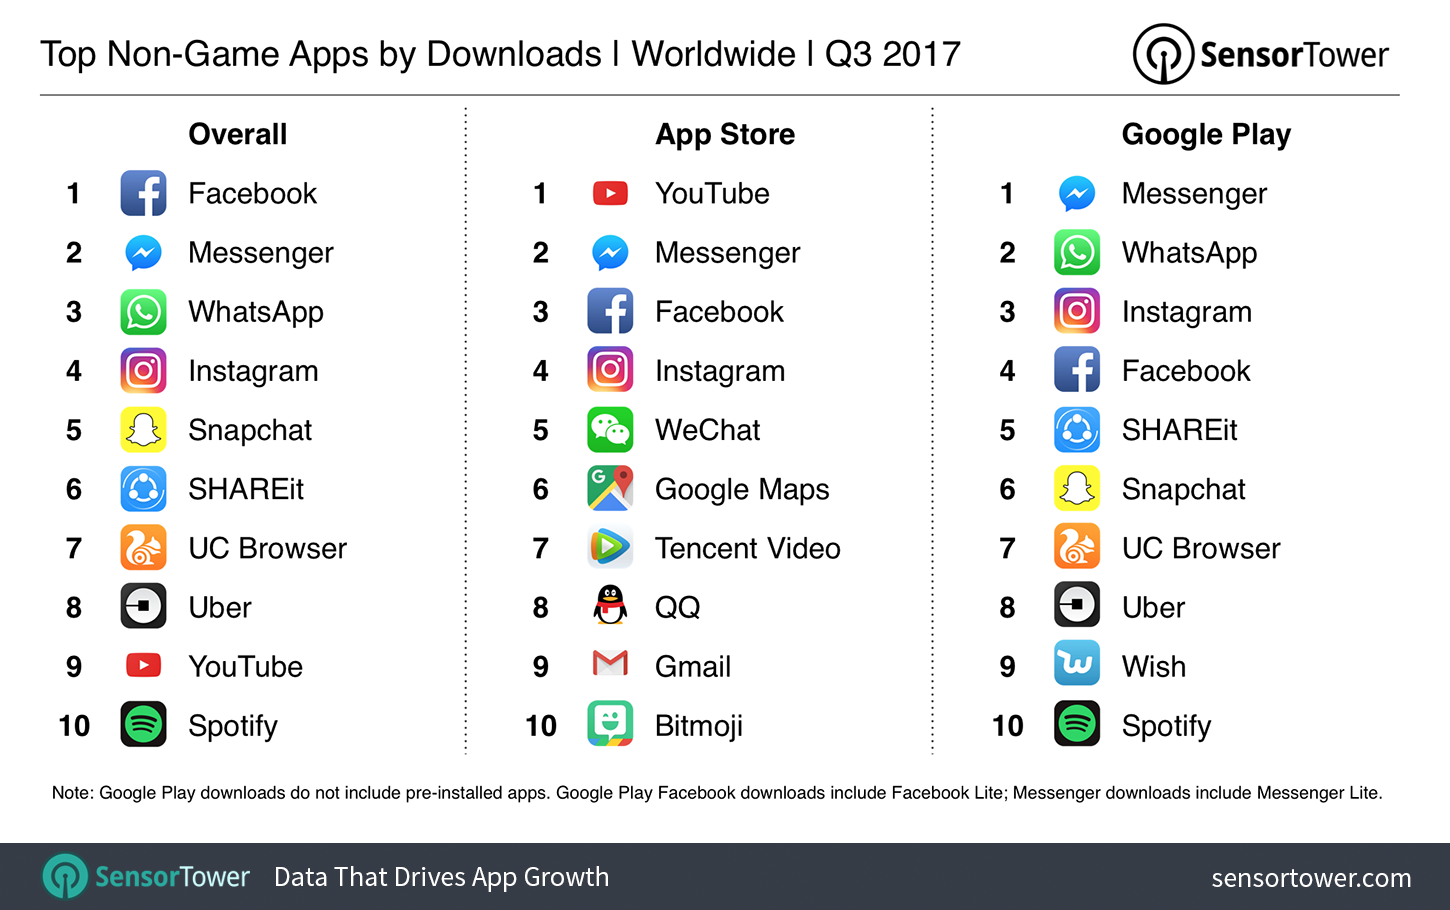 Q3 2017's Top Mobile Apps by Worldwide Downloads